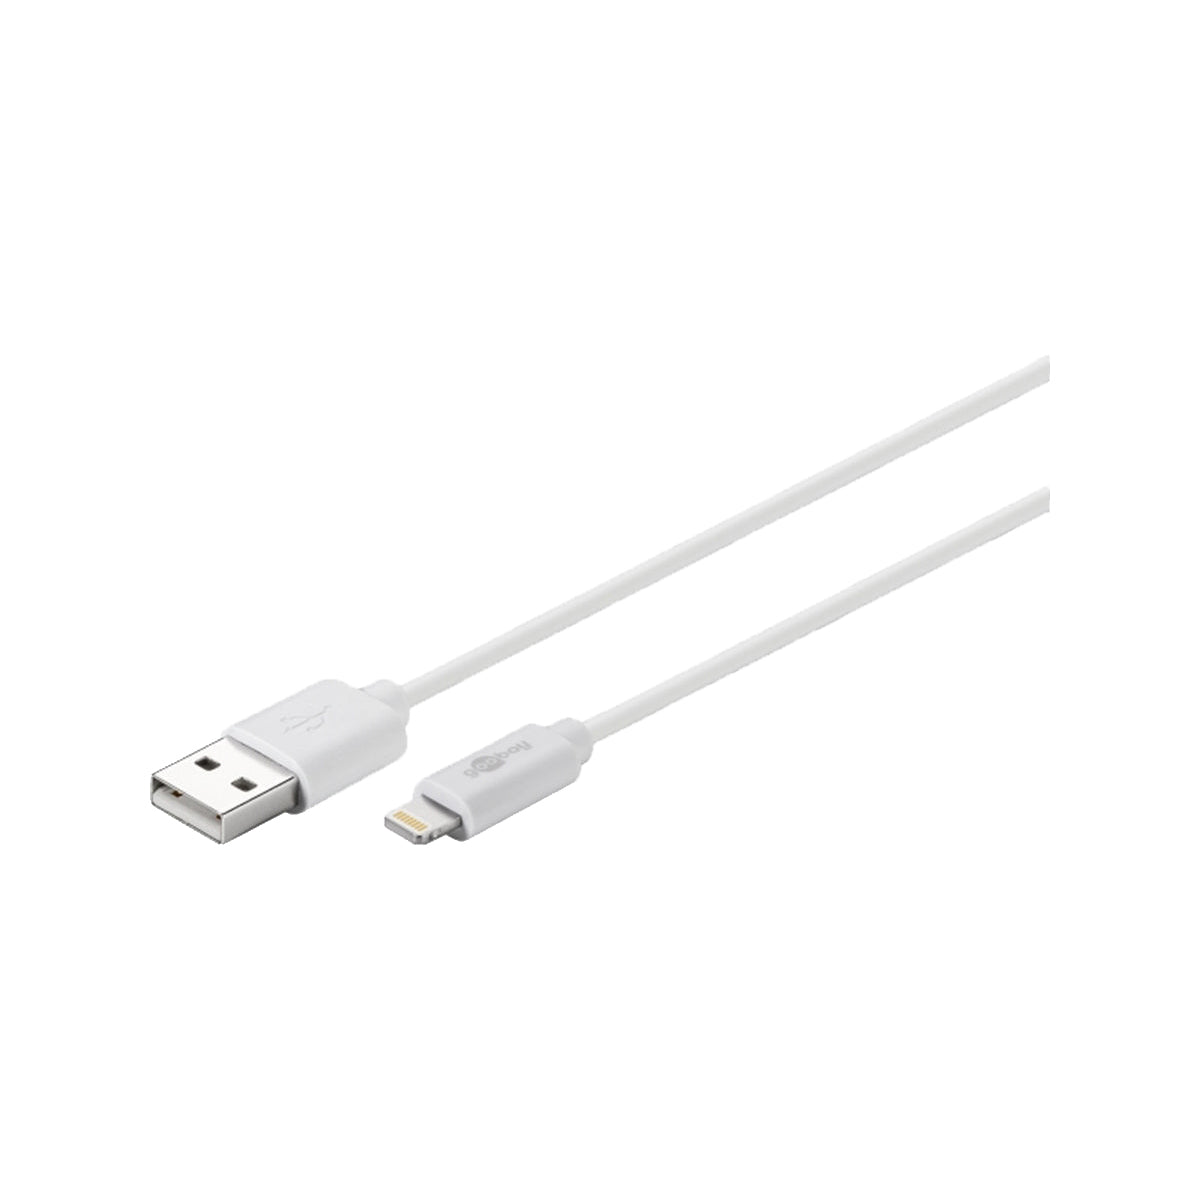 Goobay USB-A to Lightning Cable 1m for iPhone/iPad/iPod/AirPod - White